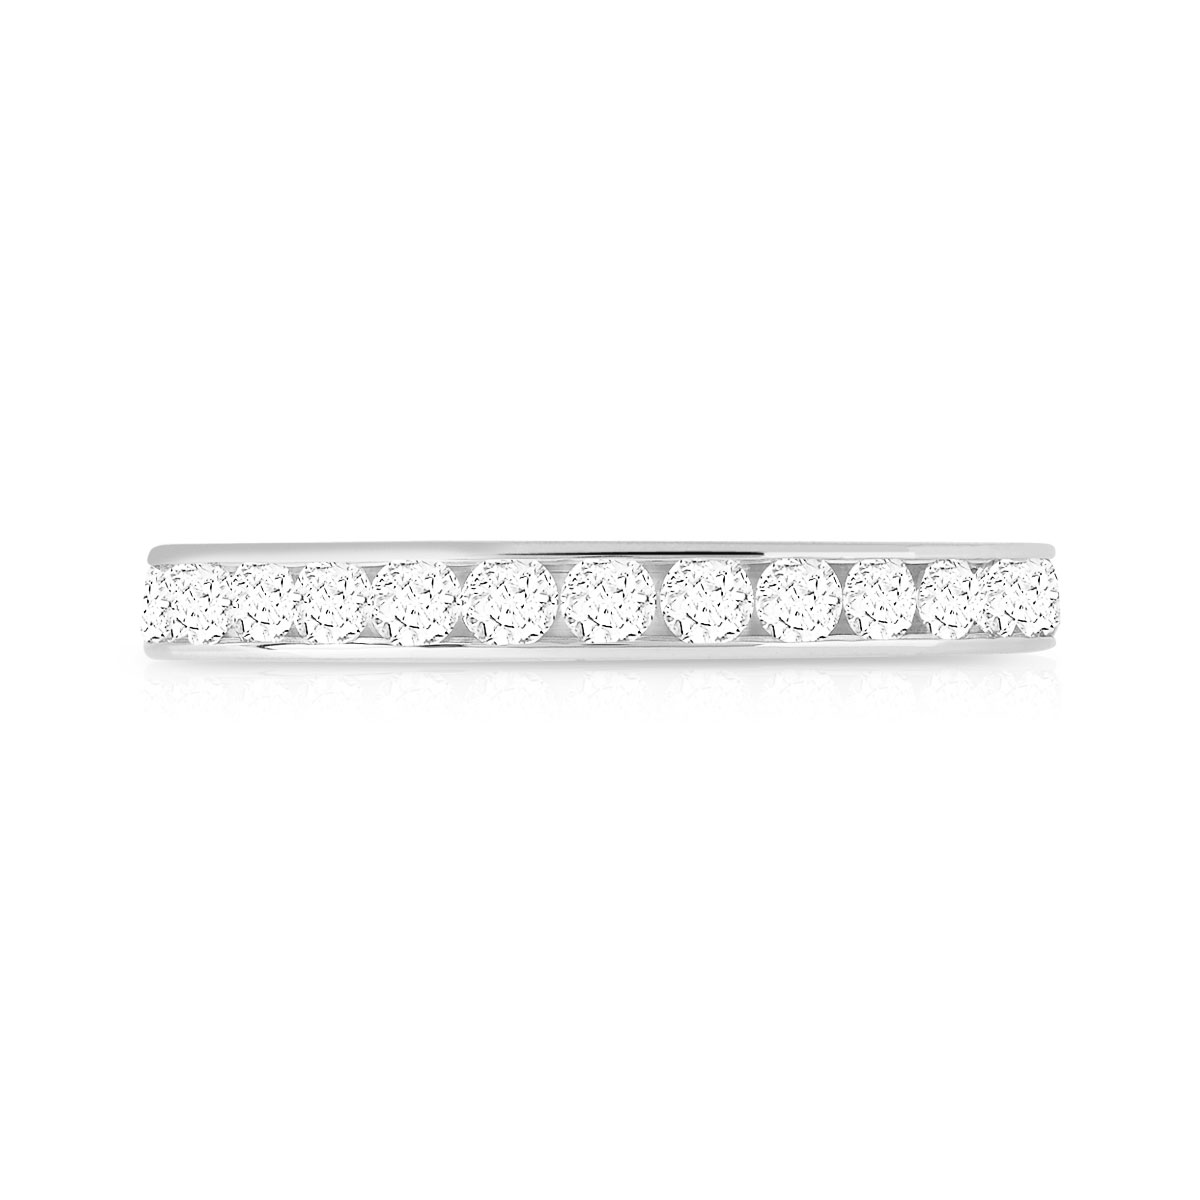 Alliance or 750 blanc diamants synthétiques 1ct - vue 3